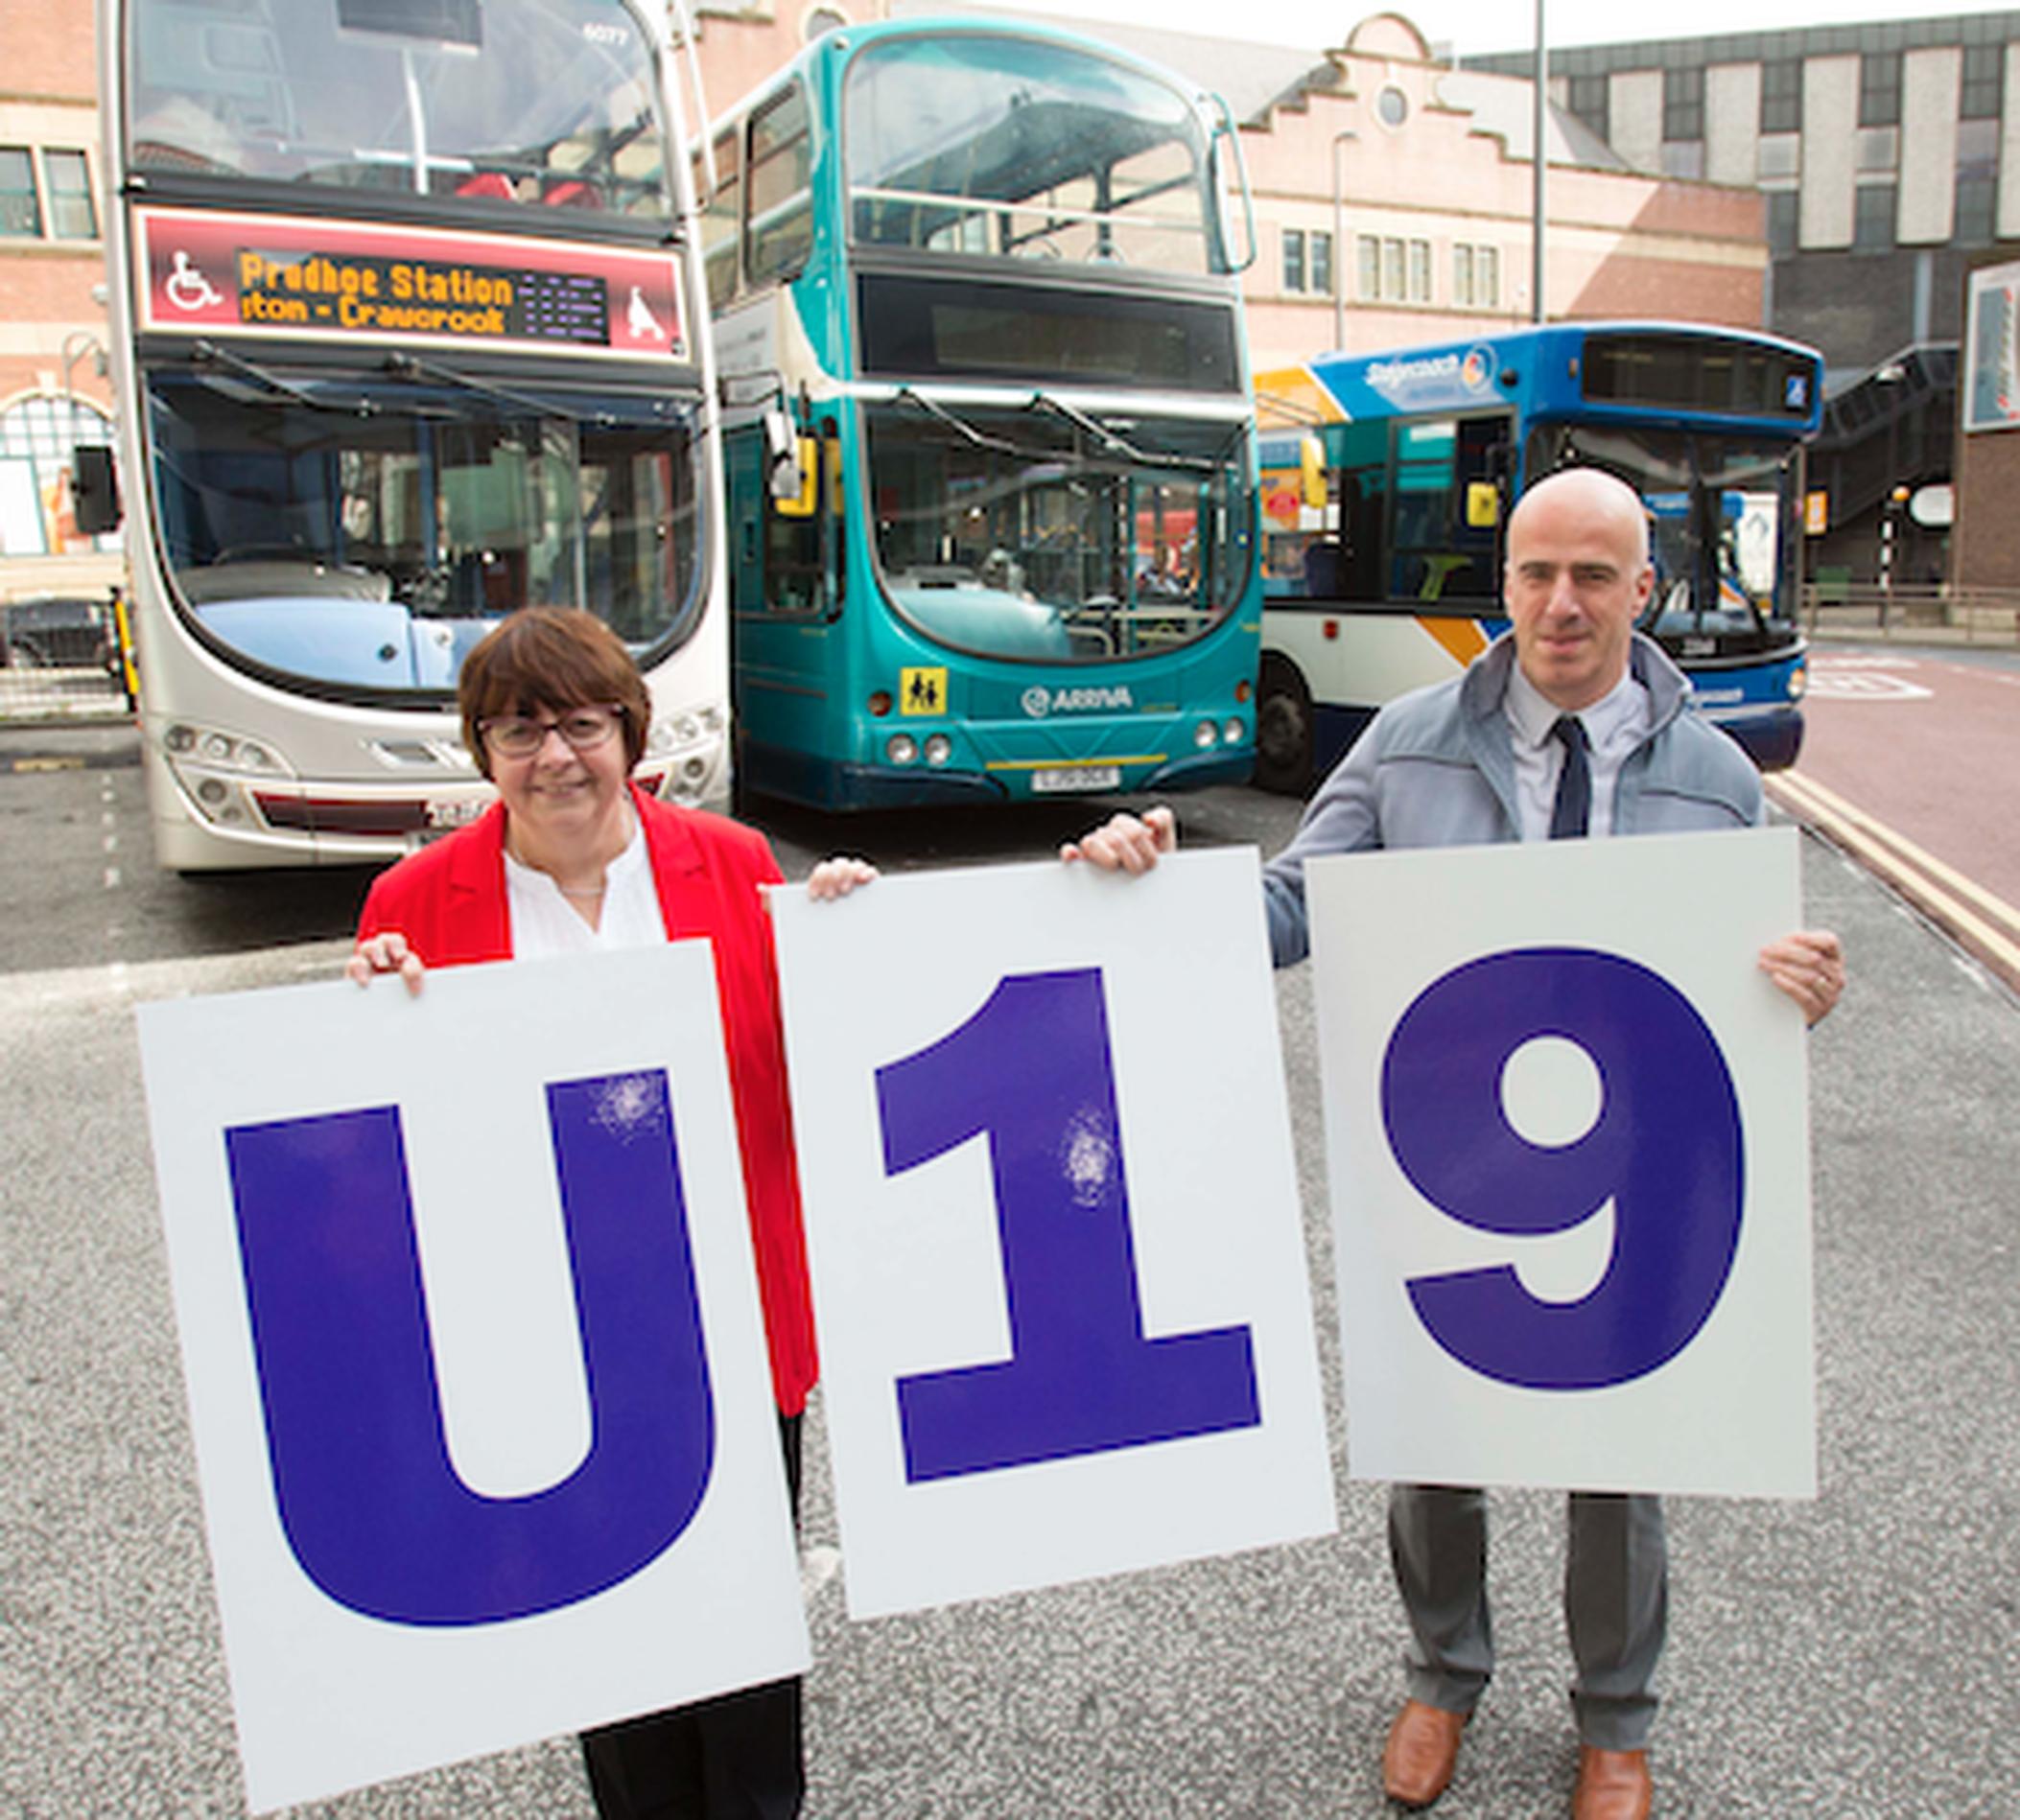 The Under-19 discount fare scheme covers Arriva, Go North East and Stagecoach Services in Tyne & Wear, Northumberland, and County Durham